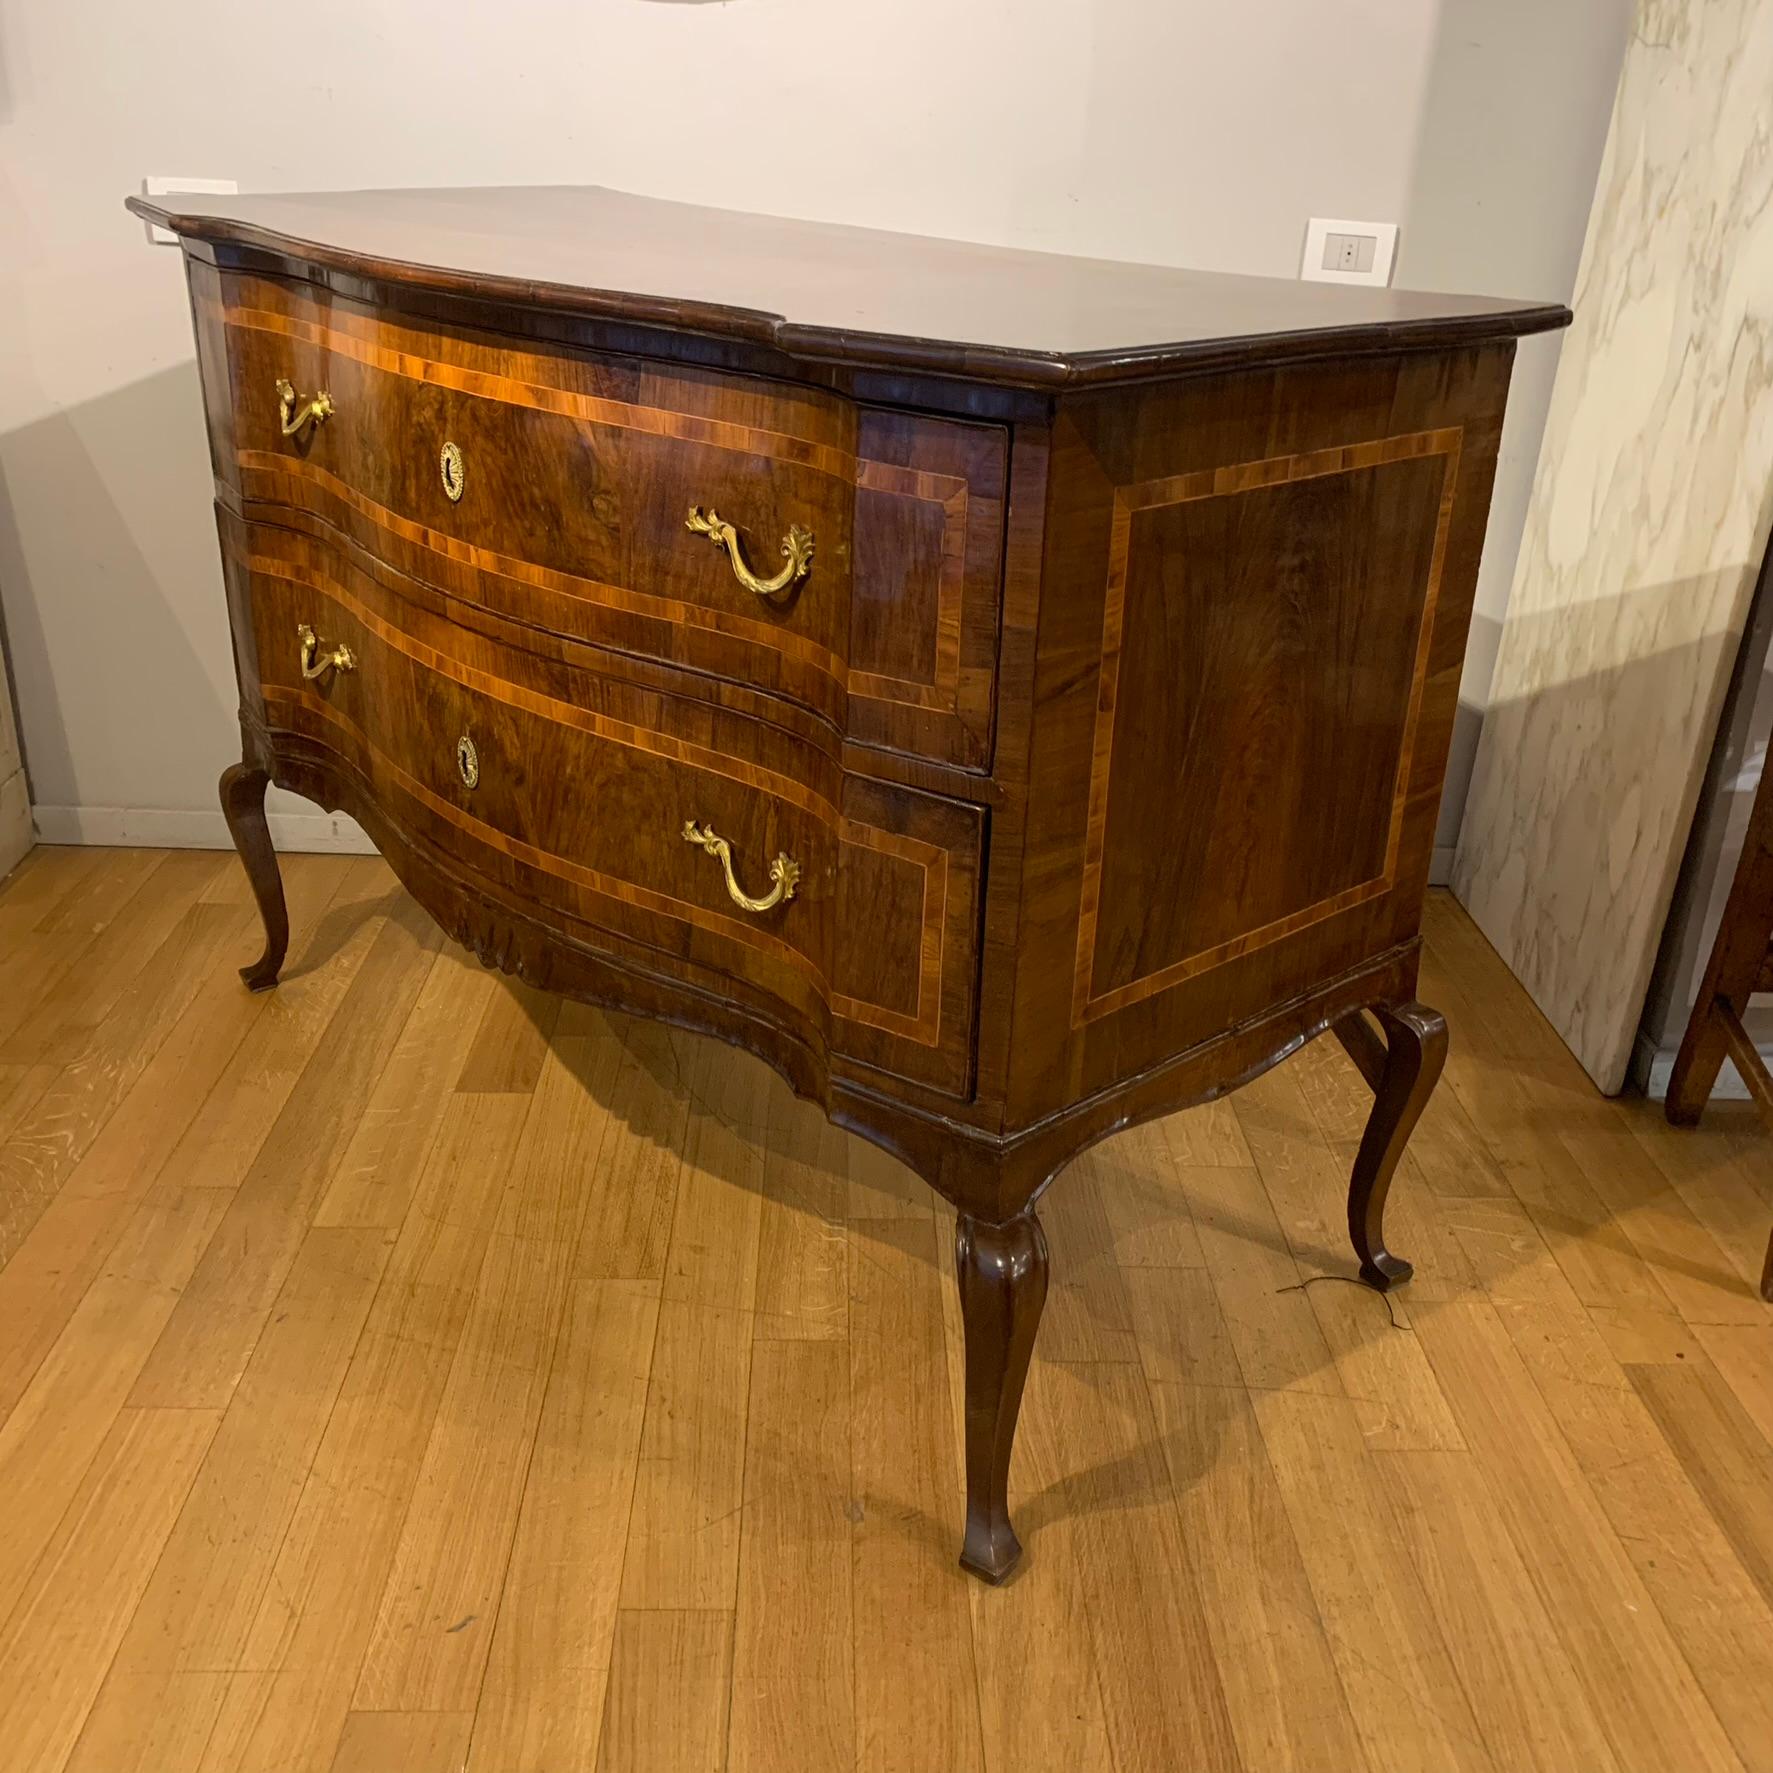 Italian END OF THE 17th CENTURY WALNUT AND CHERRY VENEREED CHEST OF DRAWERS For Sale